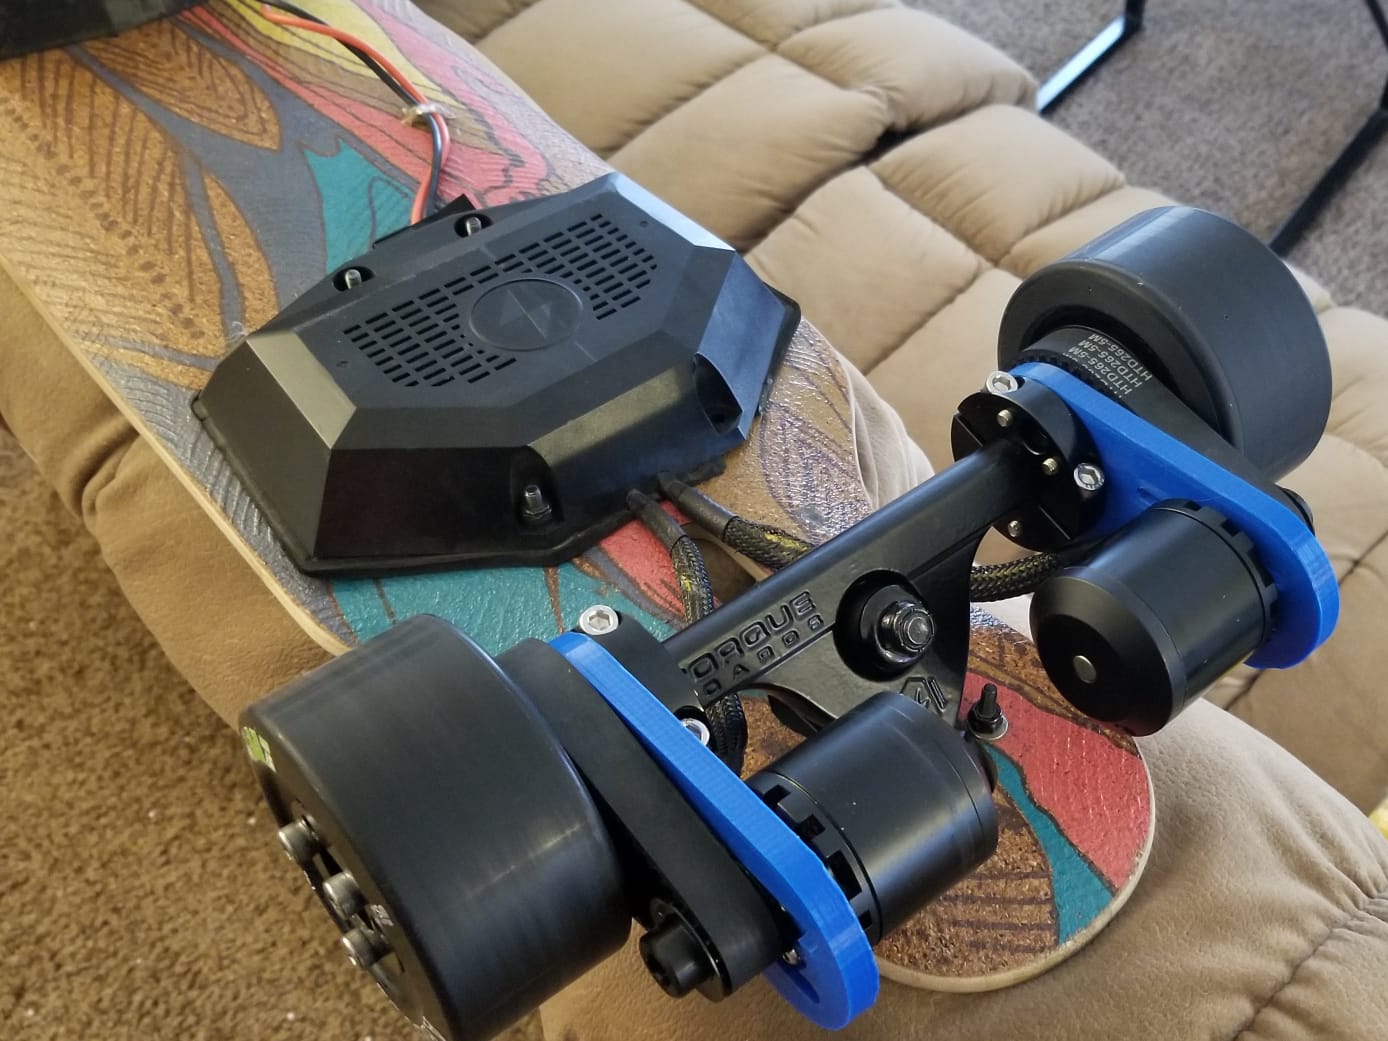 How To Mount A Motor To Electric Skateboard